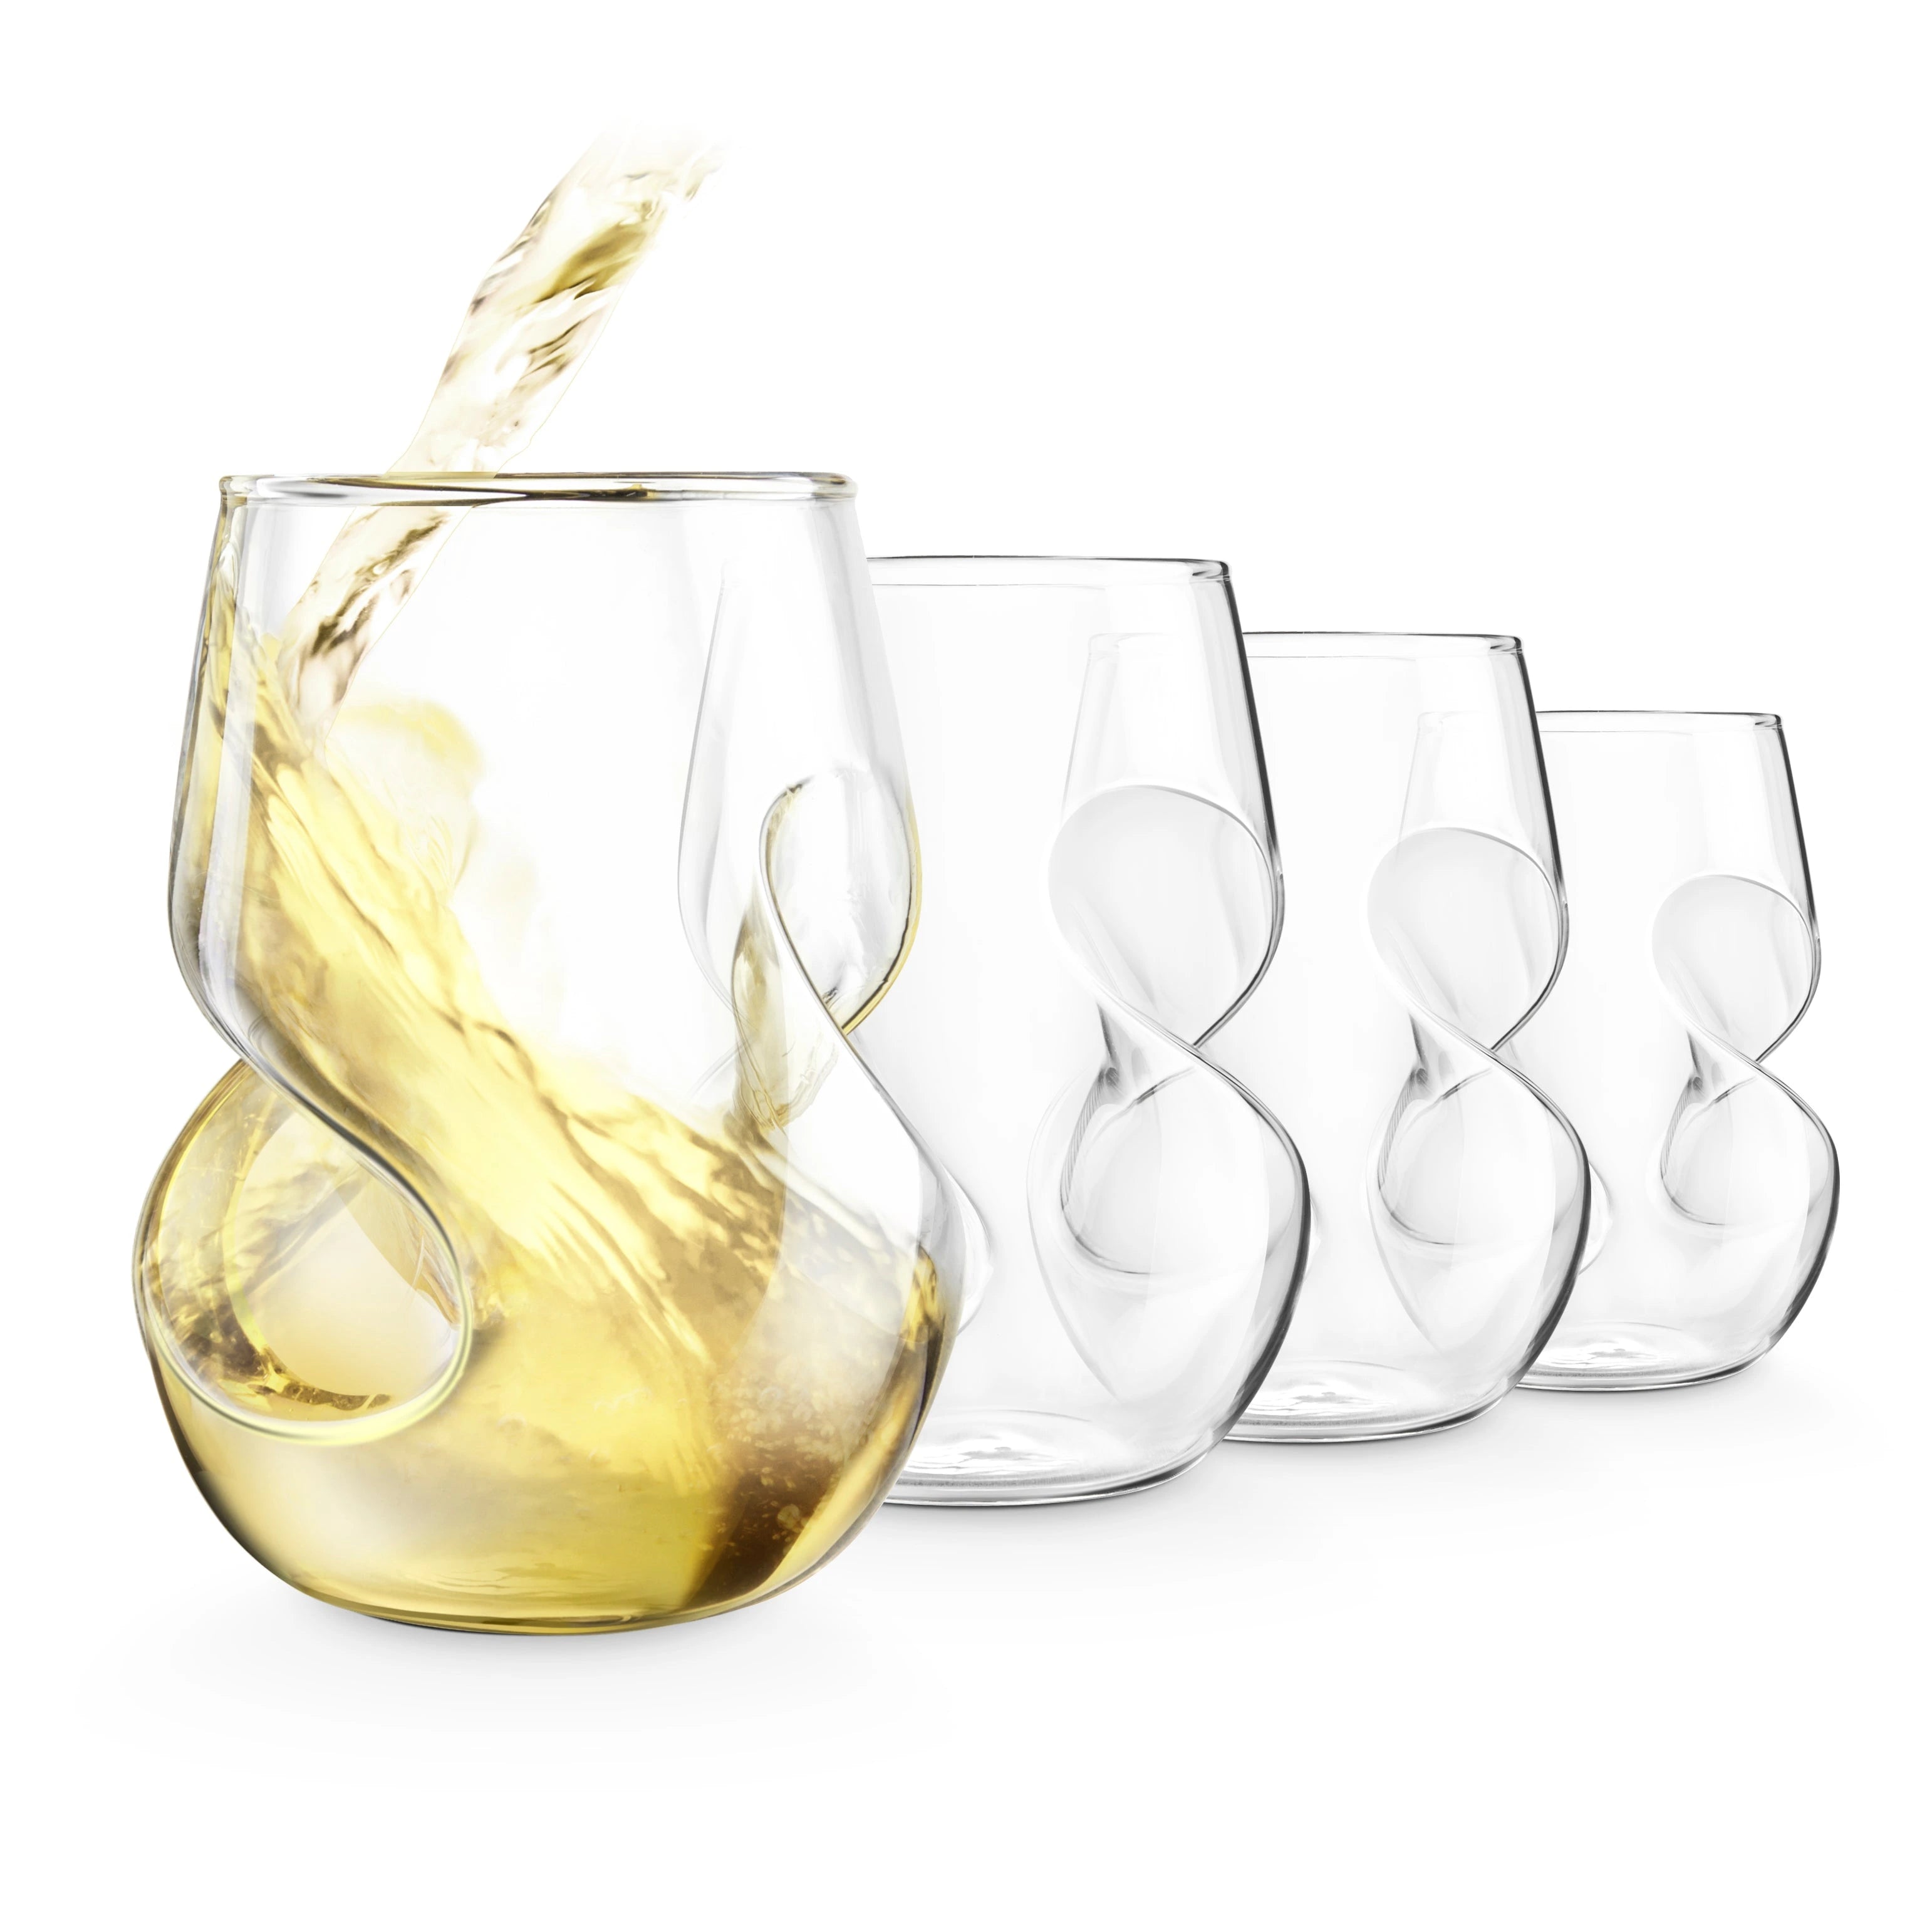 FINAL TOUCH CONUNDRUM WHITE WINE GLASS 4PC